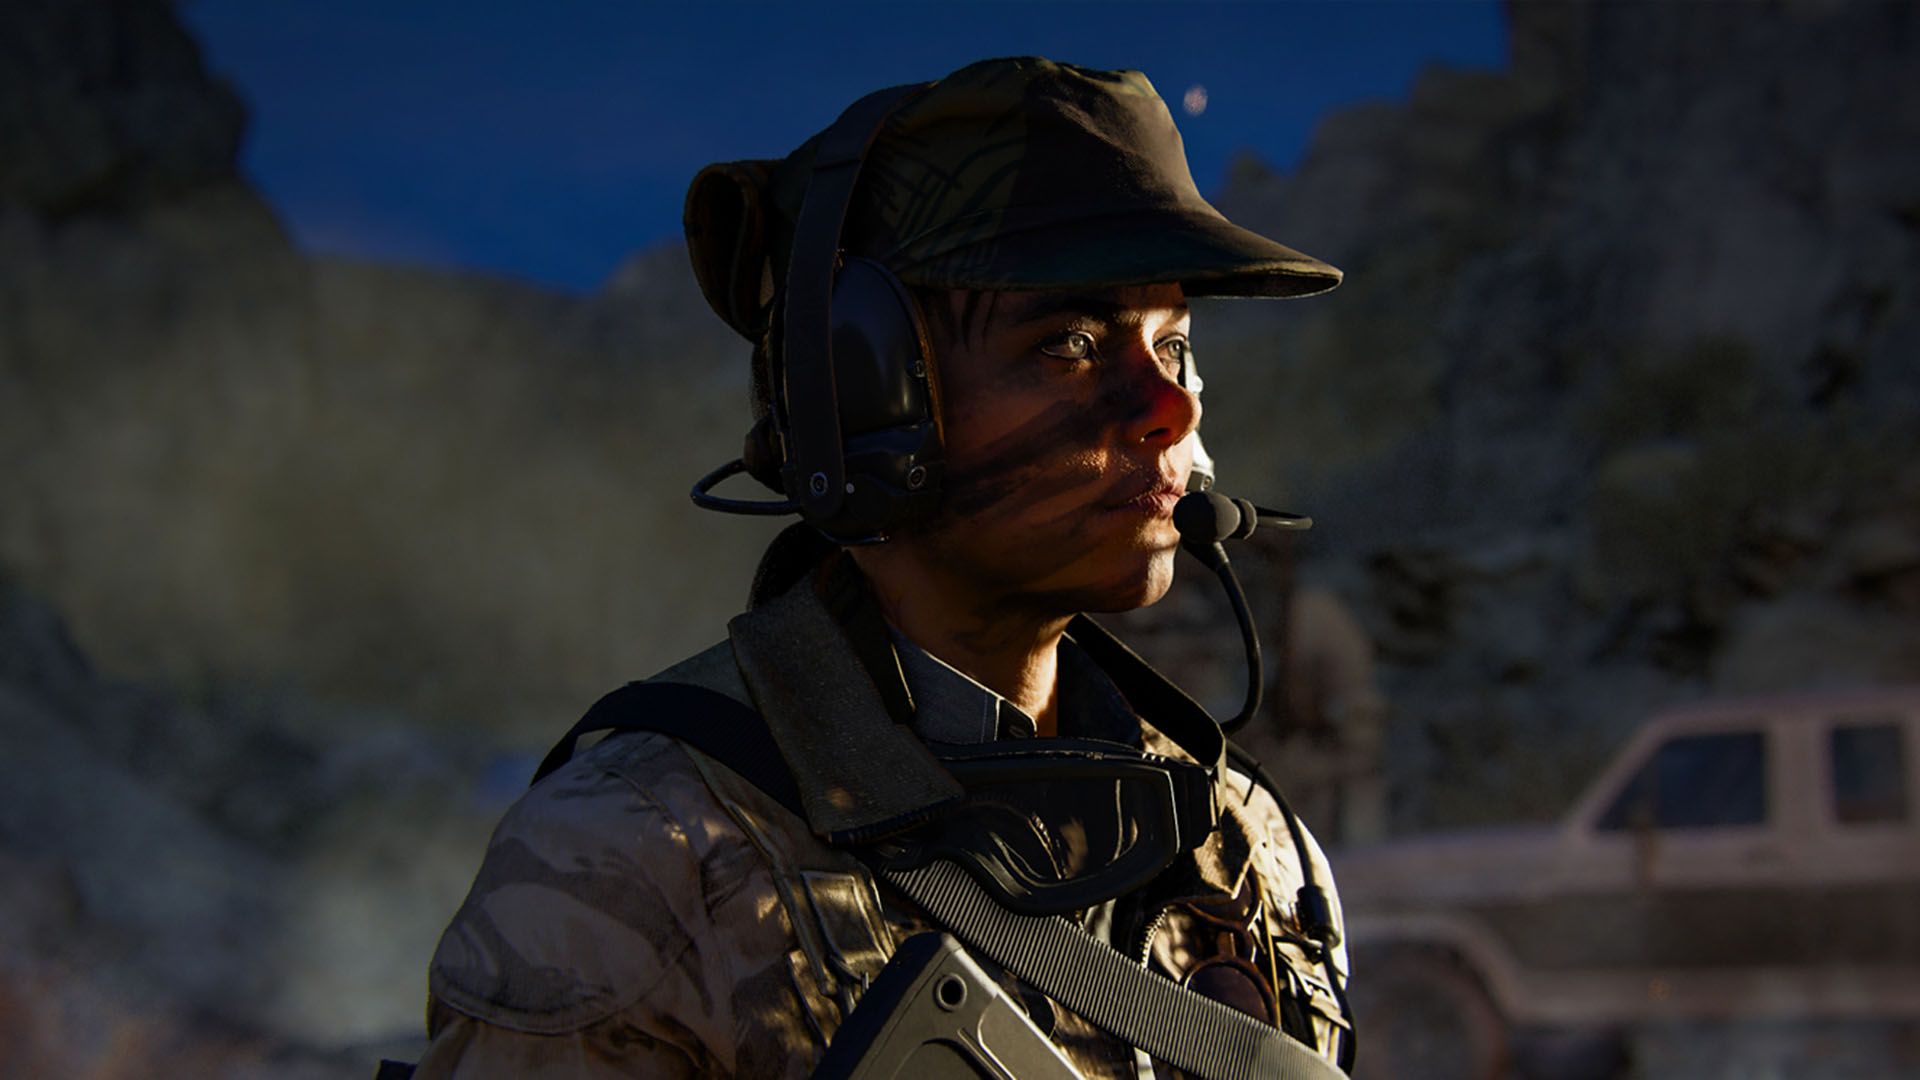 Black Ops 6 Operator wearing a military uniform and headset with a pick-up truck in background